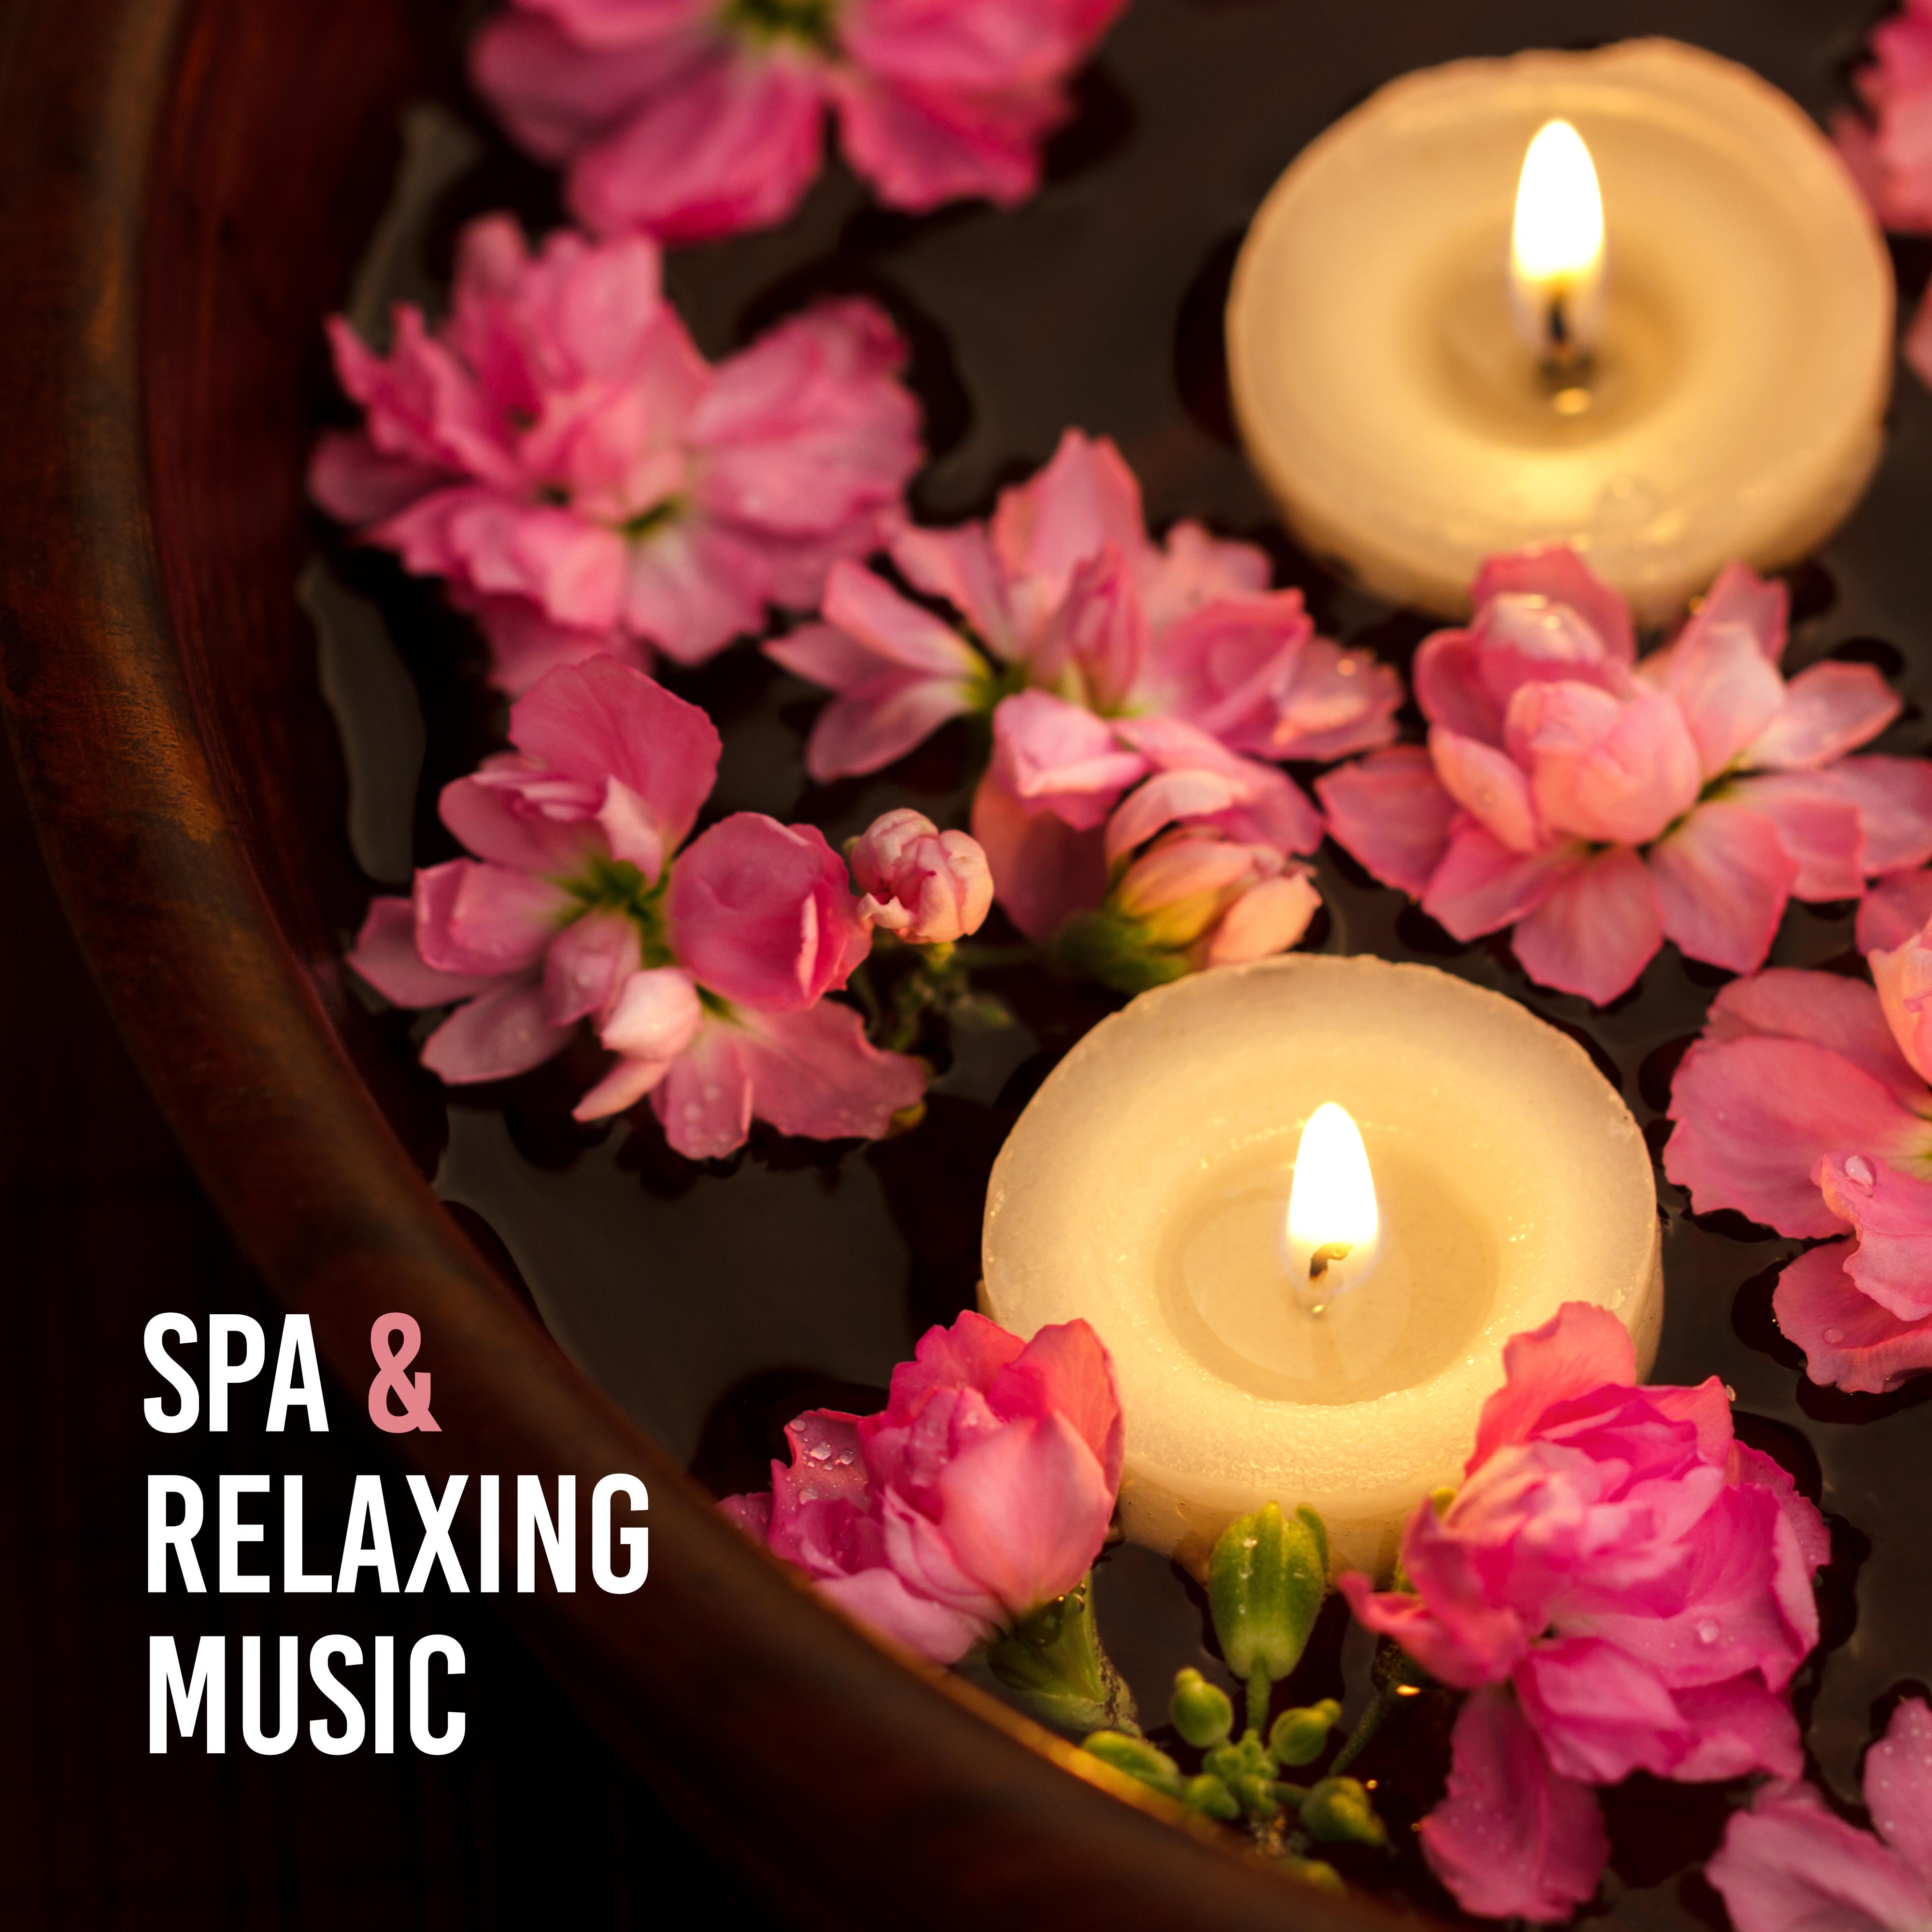 Spa & Relaxing Music